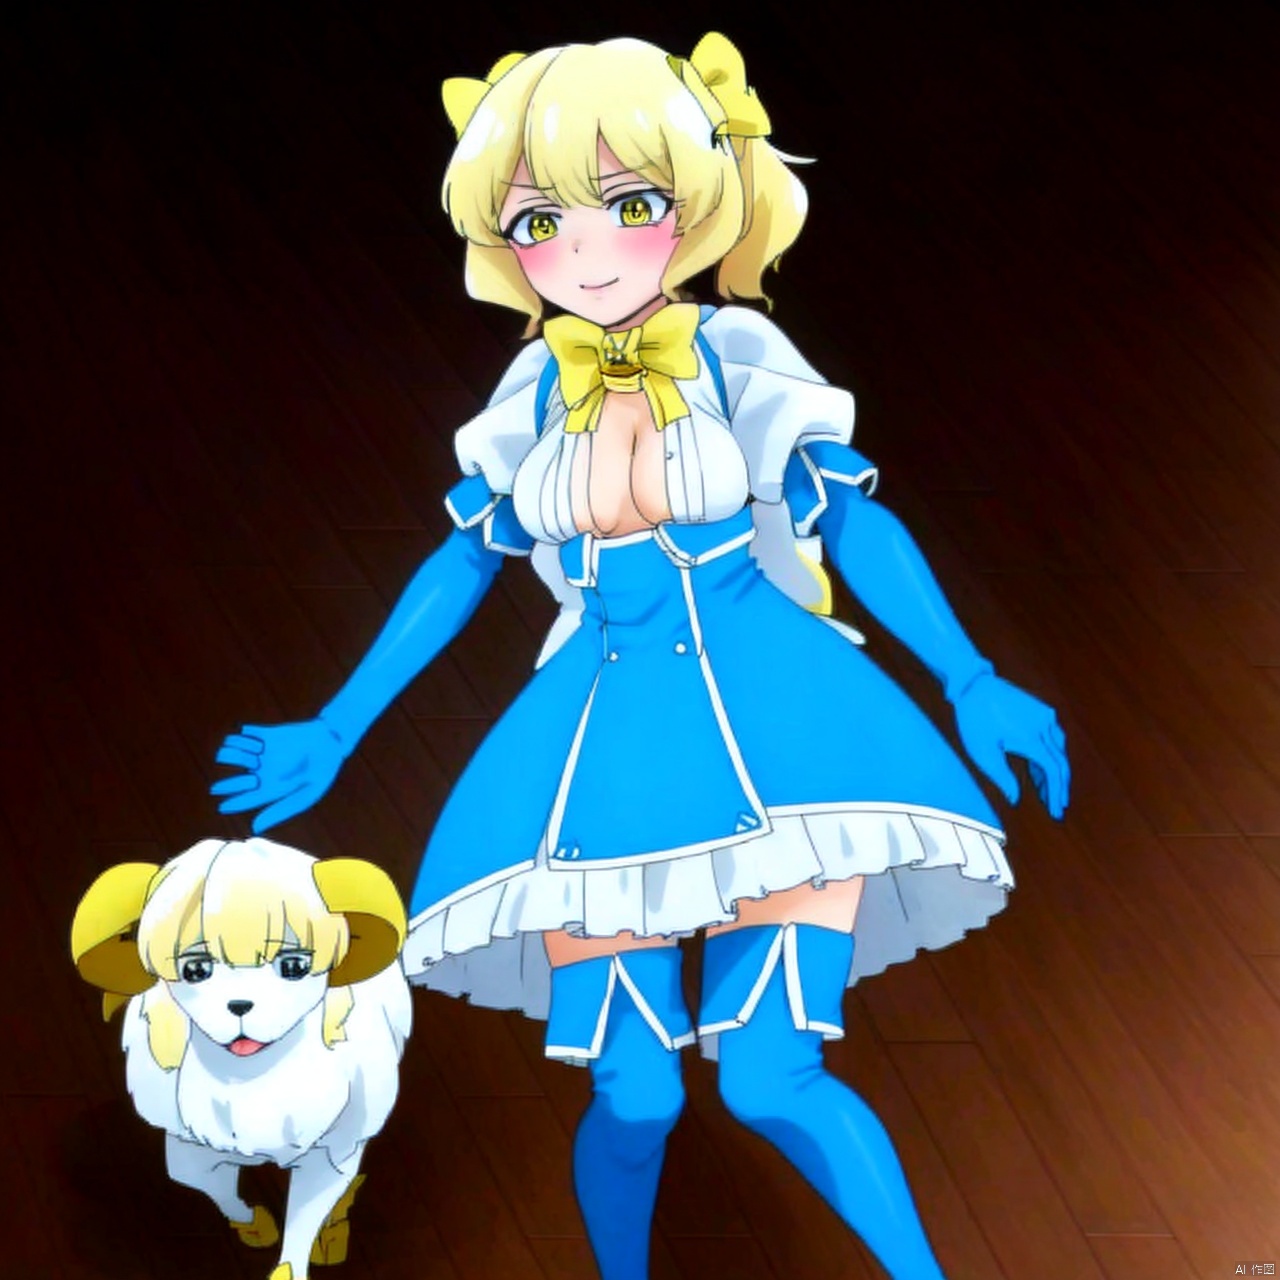 gloves,bow,dress,thighhighs,elbow gloves,1girl,puffy sleeves,hair bow,breasts,魔法枫糖, A young girl,A girl,Two yellow sheep hor